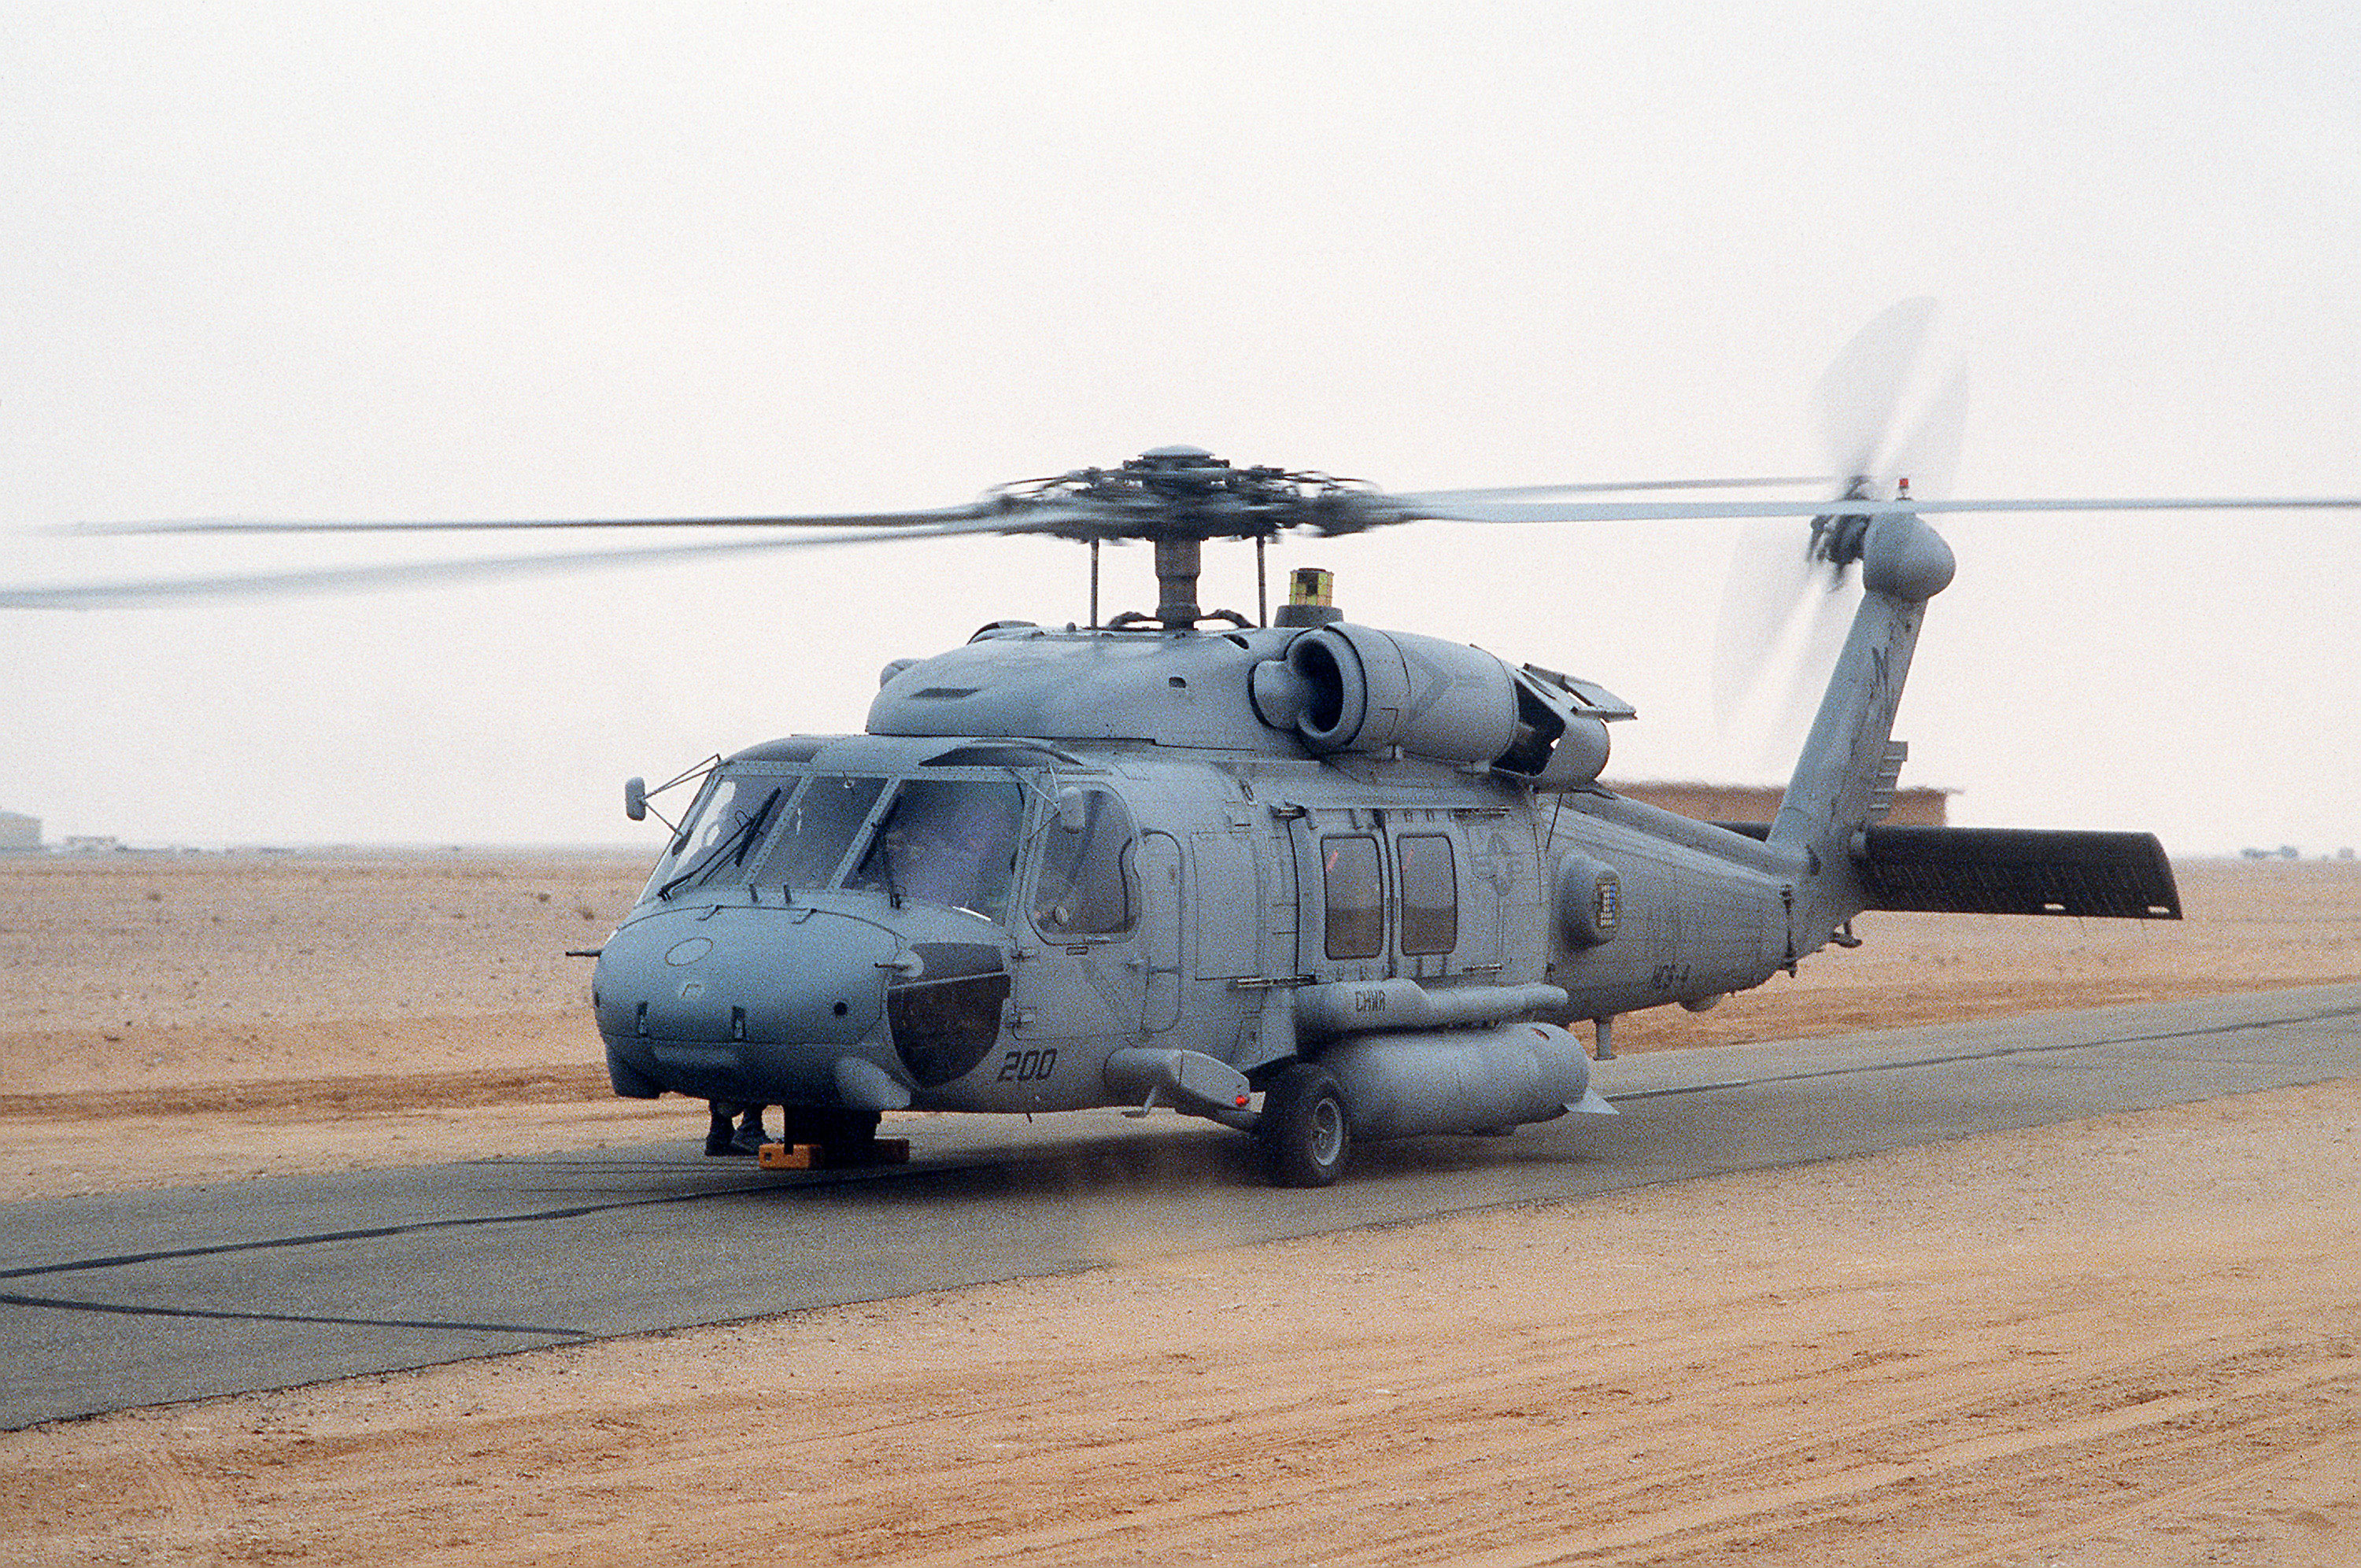 HCS-4 - HH-60H Helicopter - Desert Storm - Photo